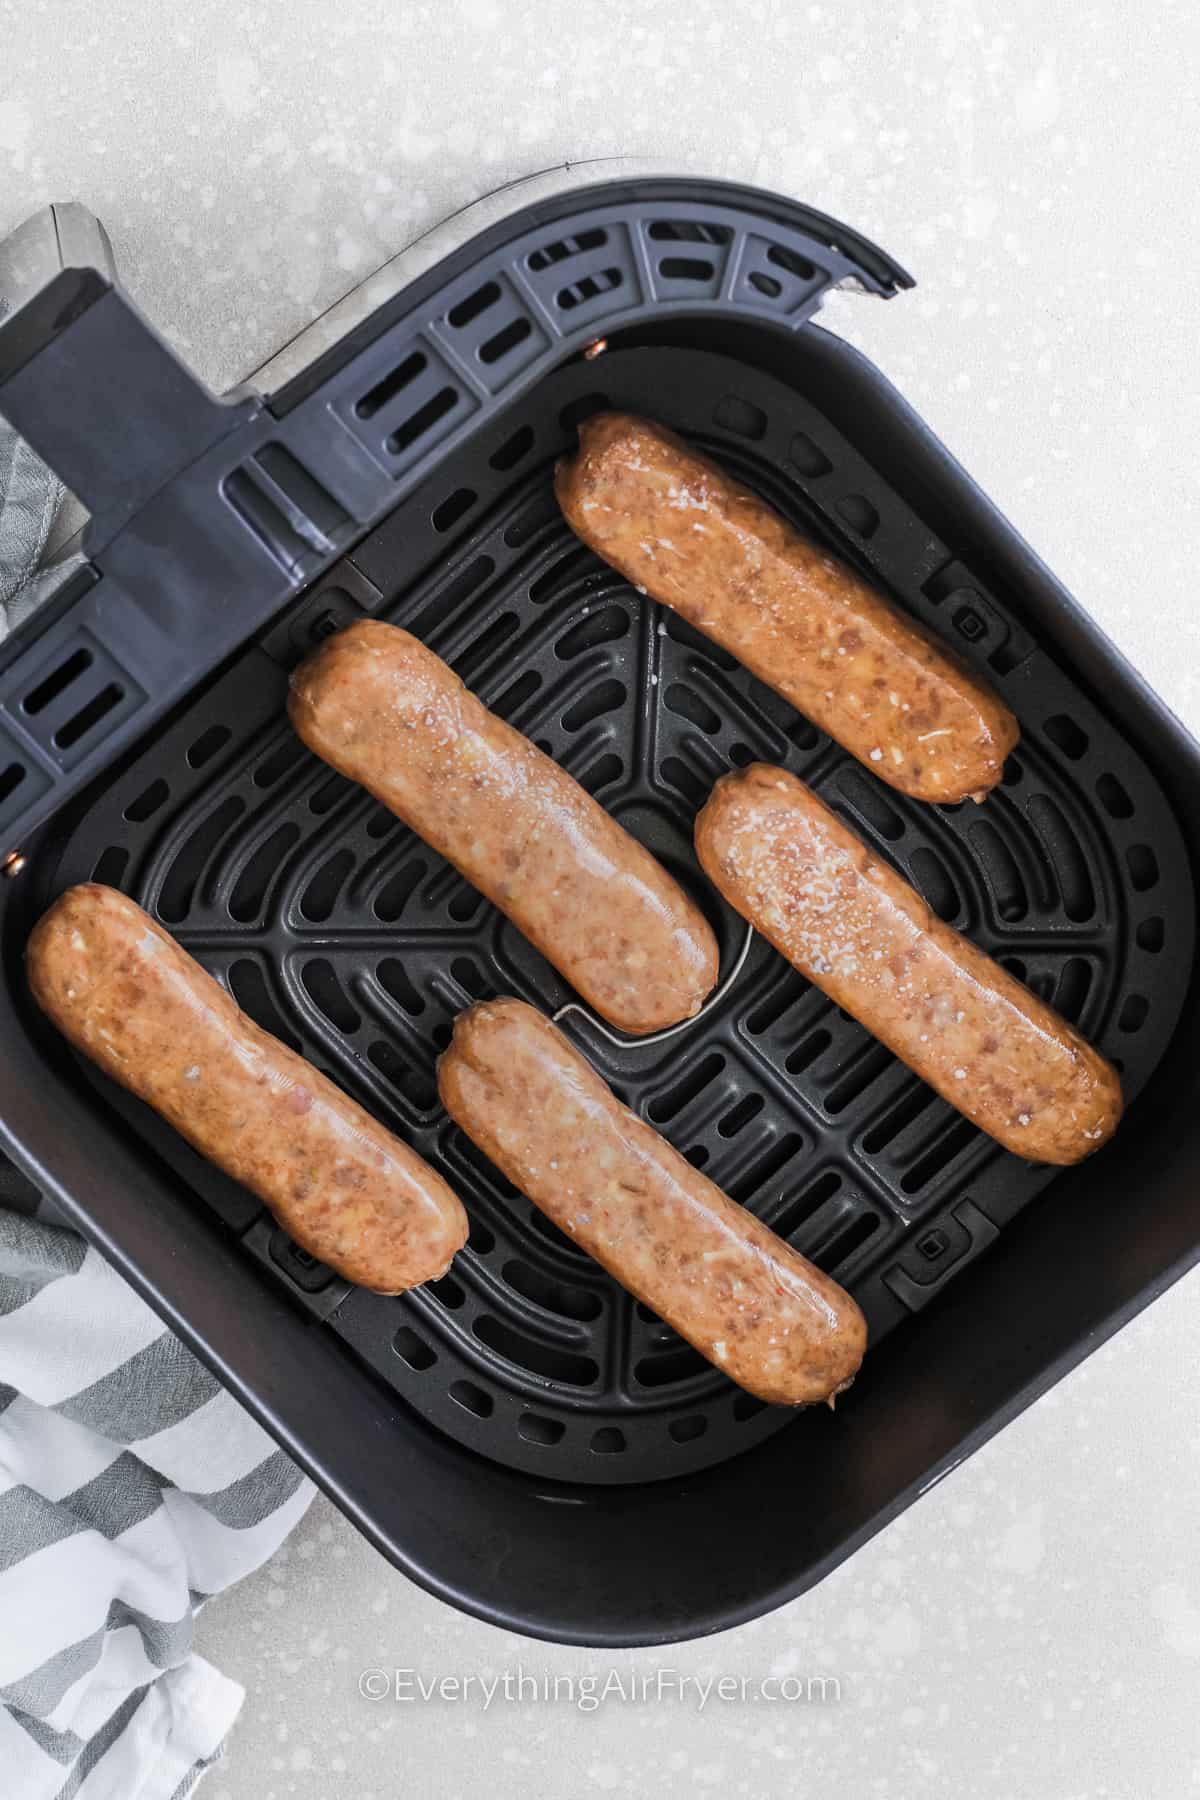 Air fryer chicken sausage in an air fryer basket before being cooked